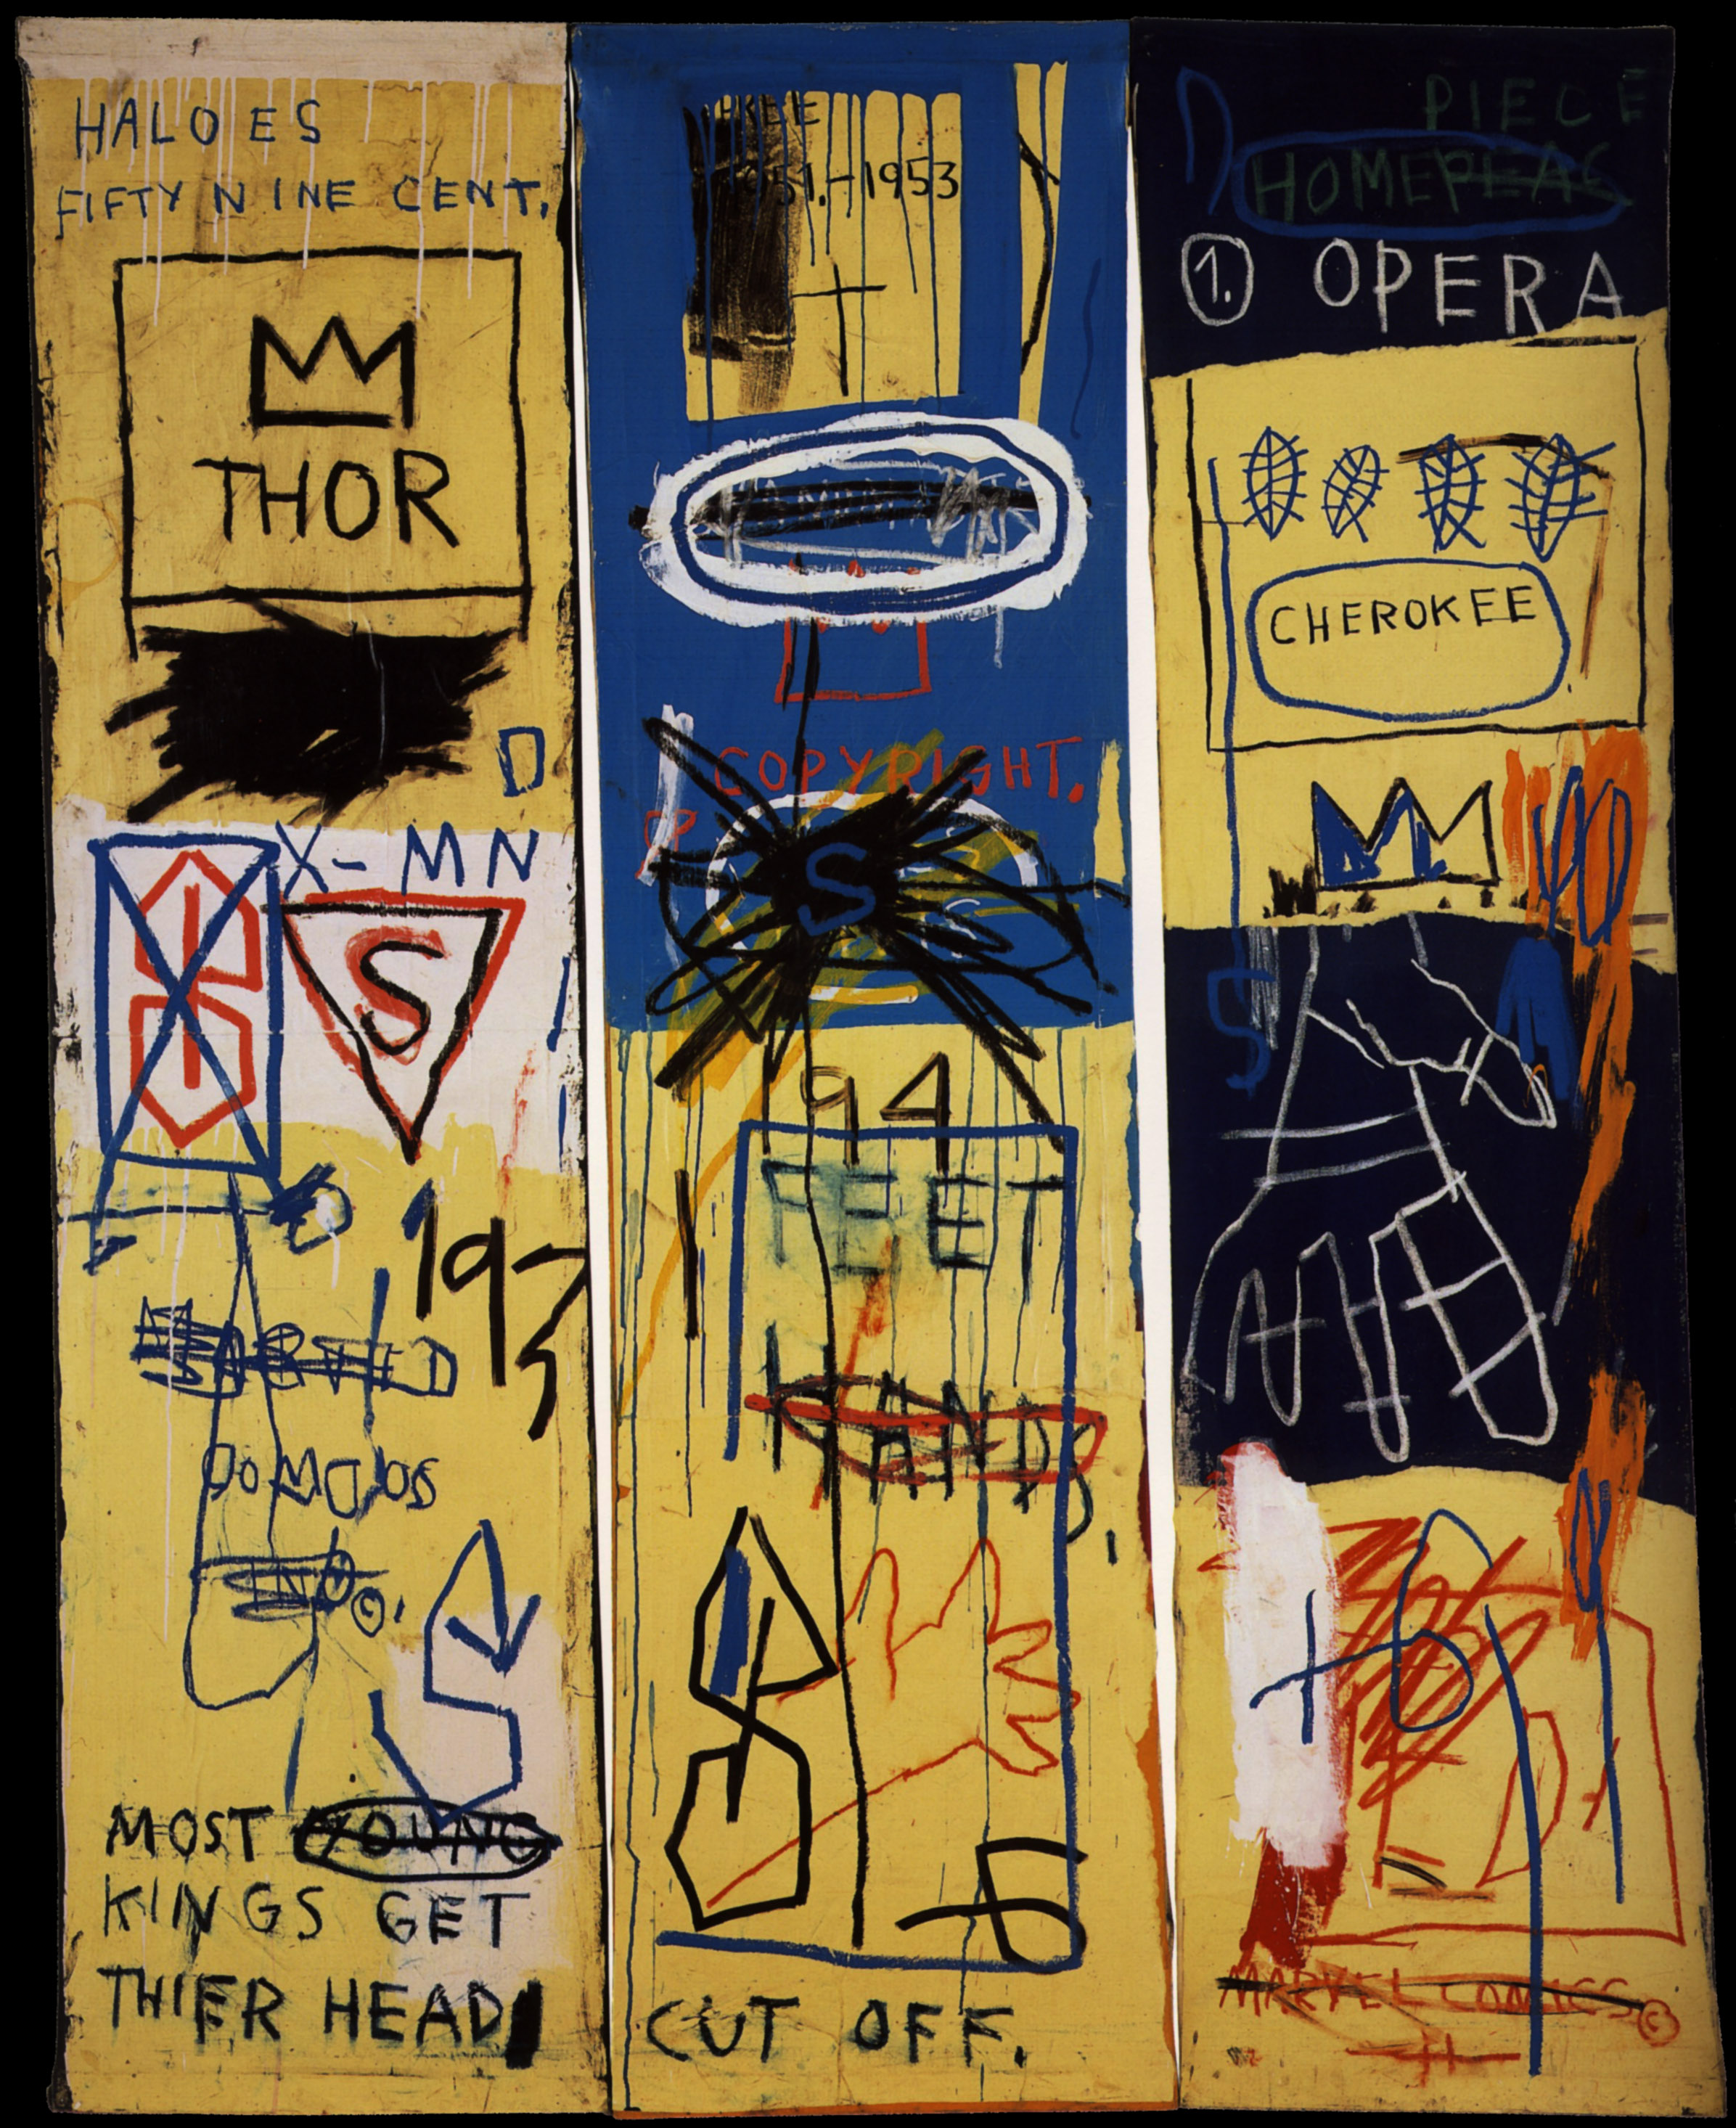 Image result for most young kings get their heads cut off basquiat